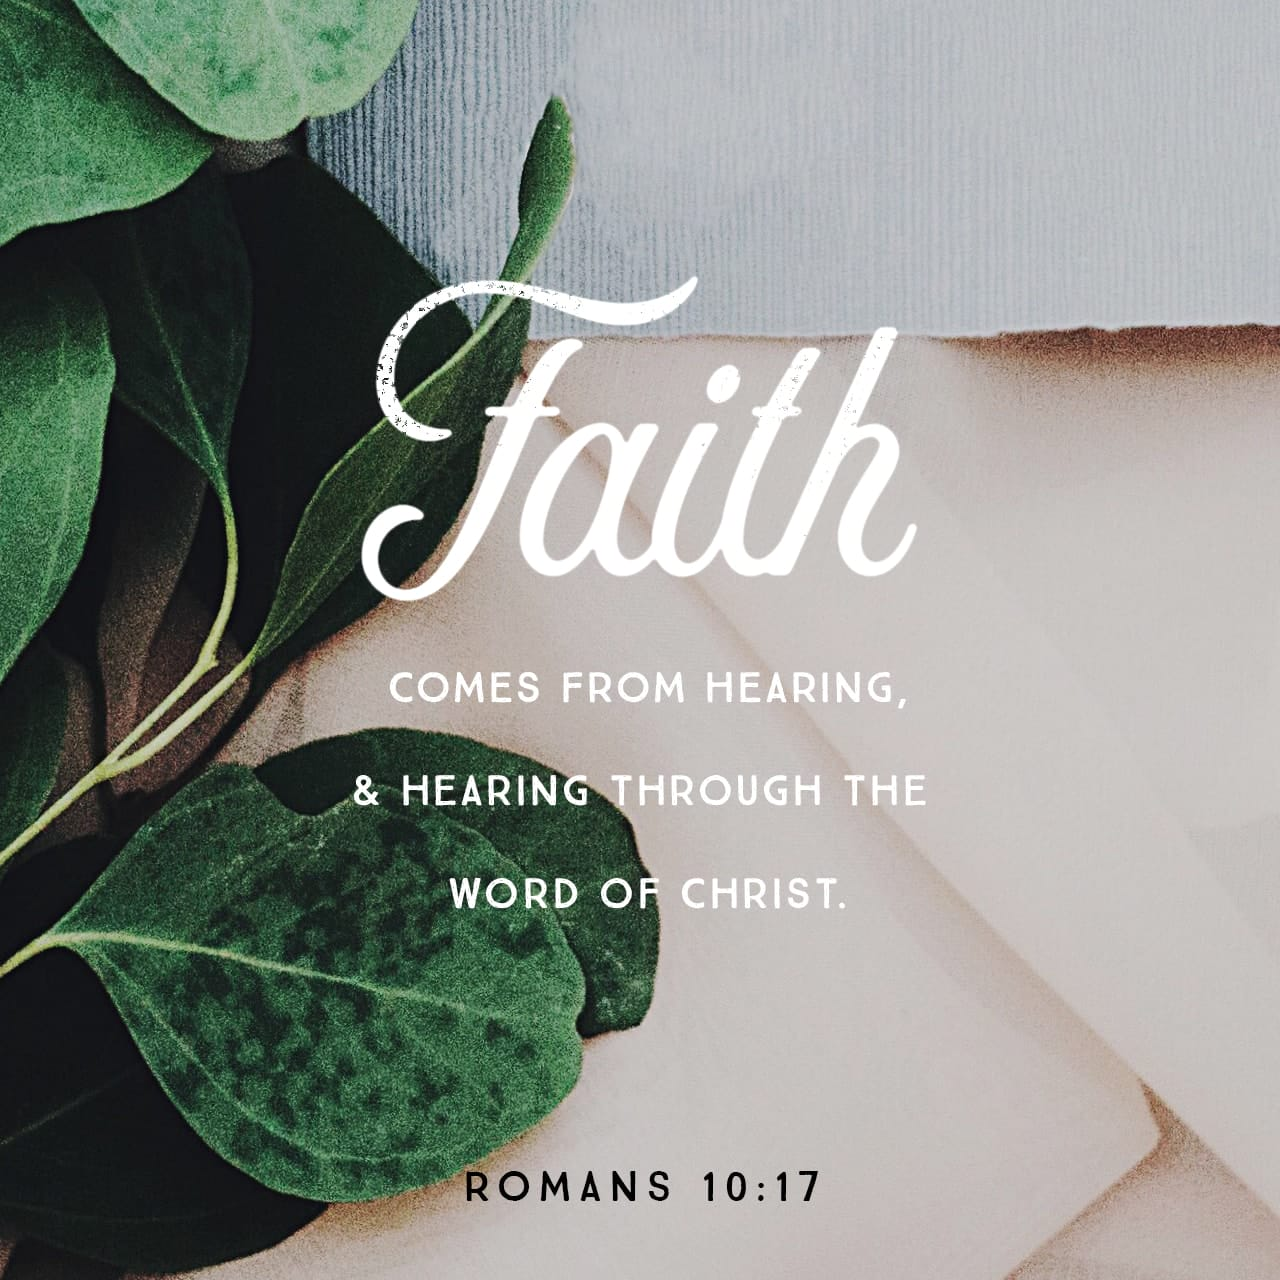 The Power of Hearing: A Reflection on Romans 10:17